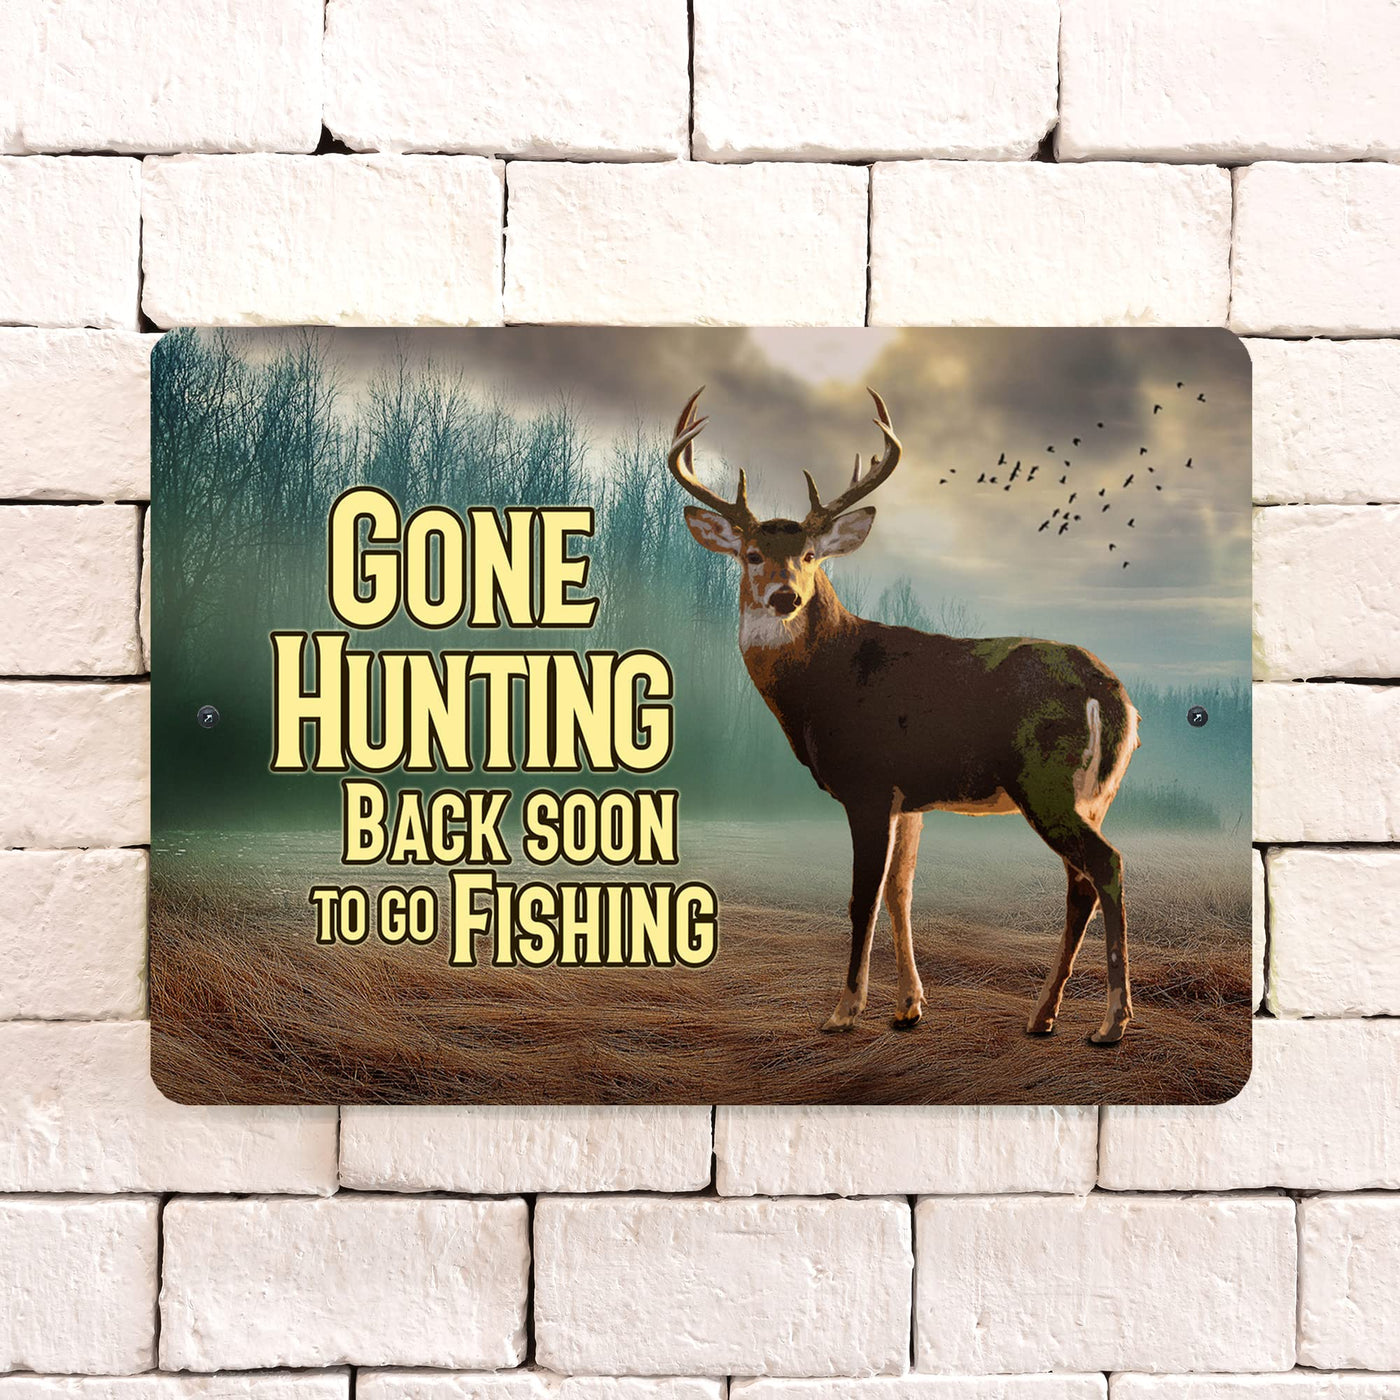 Gone Hunting -Back Soon to Go Fishing Metal Signs Vintage Wall Art -12 x 8  Funny Rustic Outdoor Hunt Sign for Lake House, Patio, Camp, Lodge - Tin